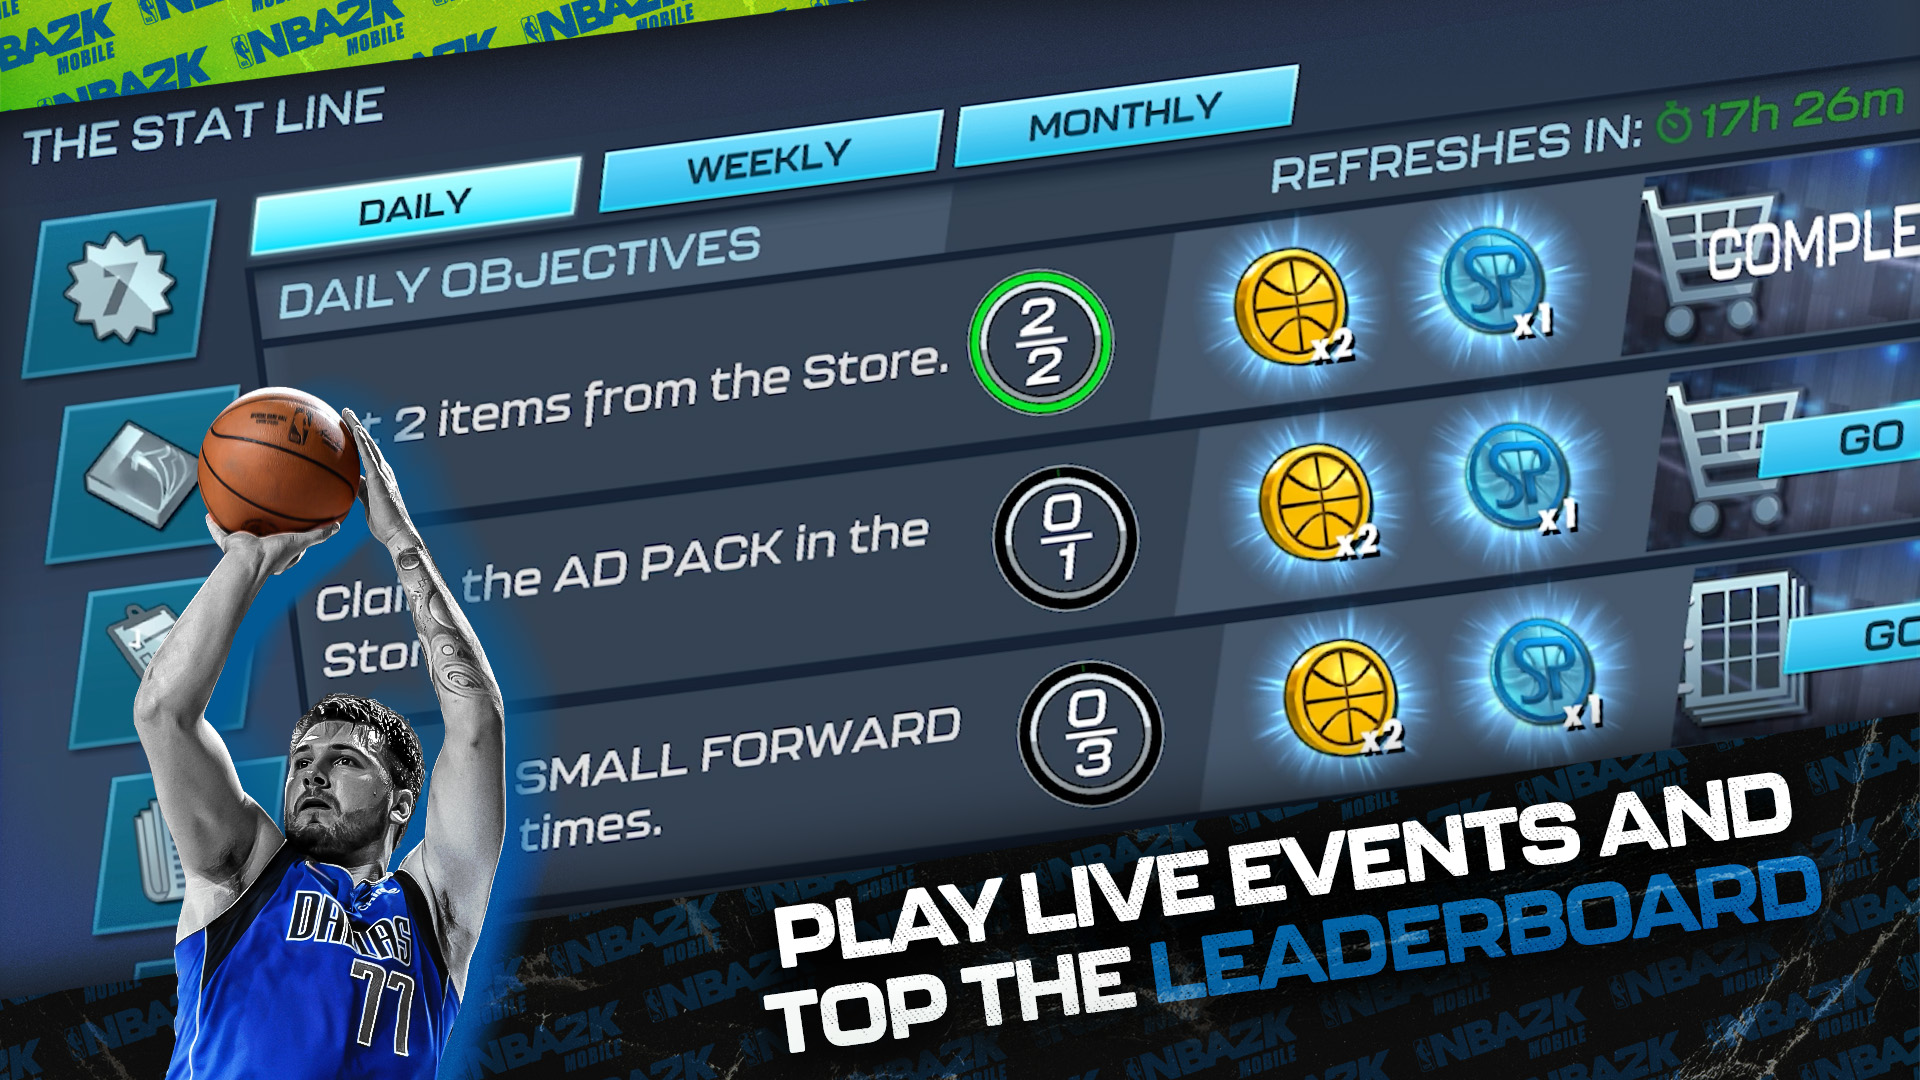 Play live events and top the Leaderboard